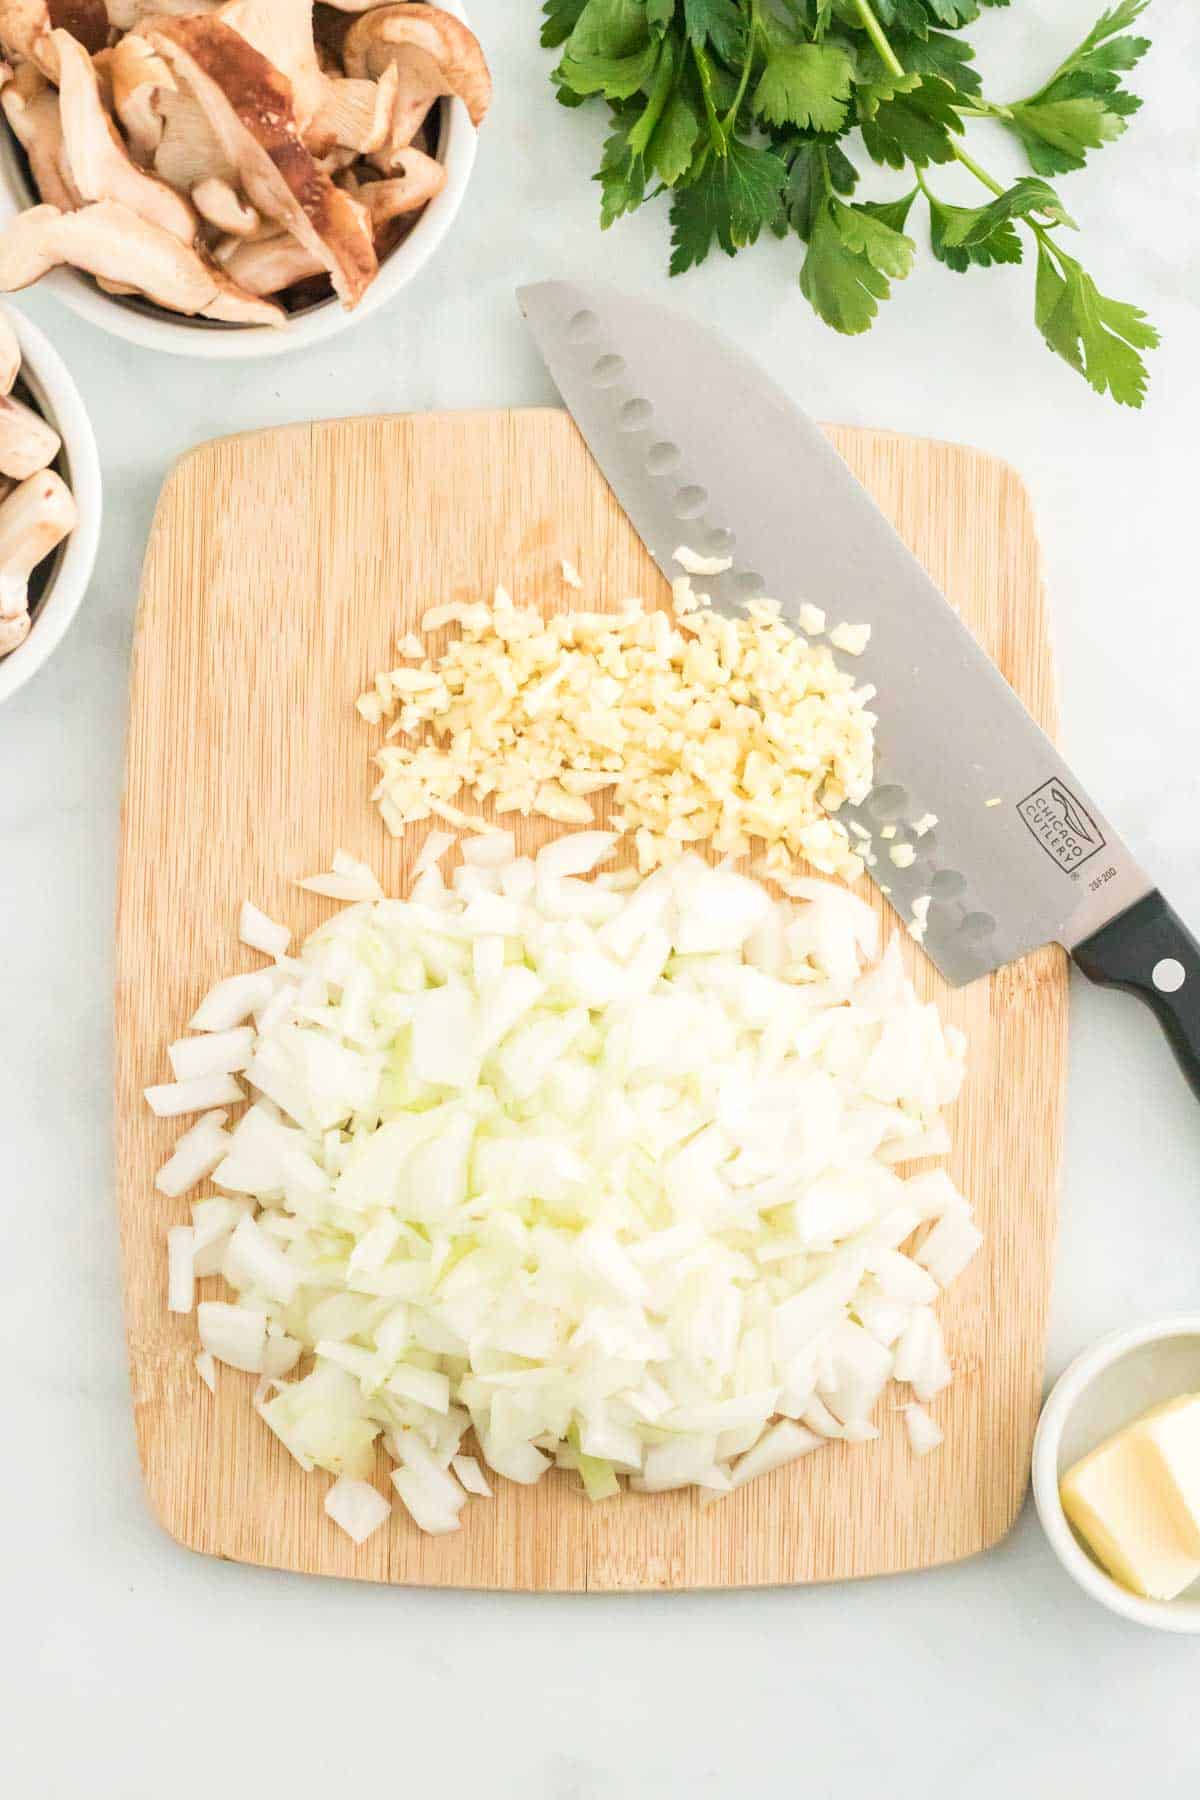 Diced onions on a wooden cutting board next to a large knife.